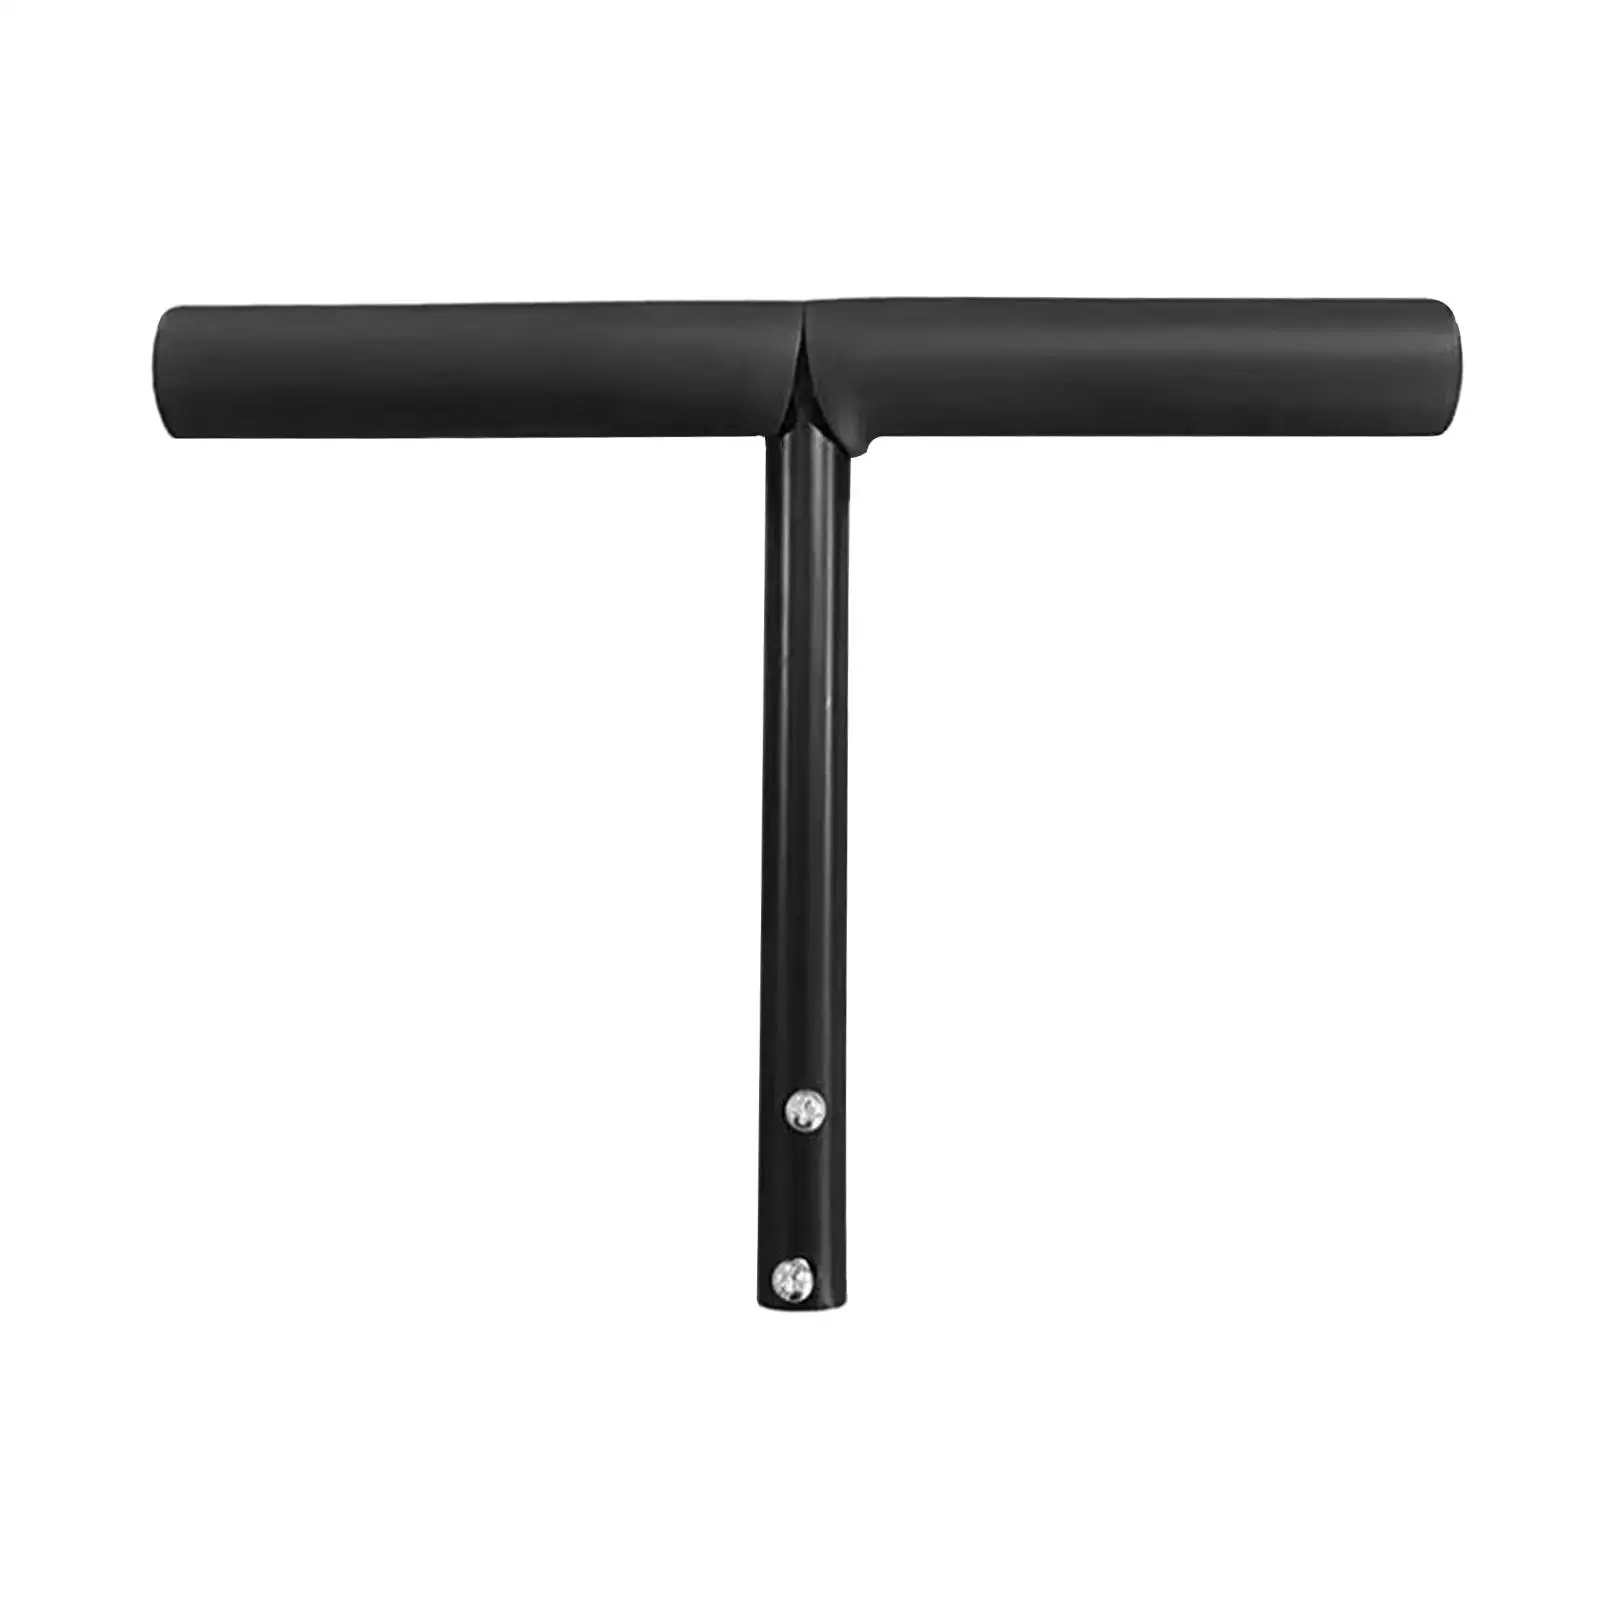 T Shaped Push Handle Bar Sturdy Easy to Install for Travel Home